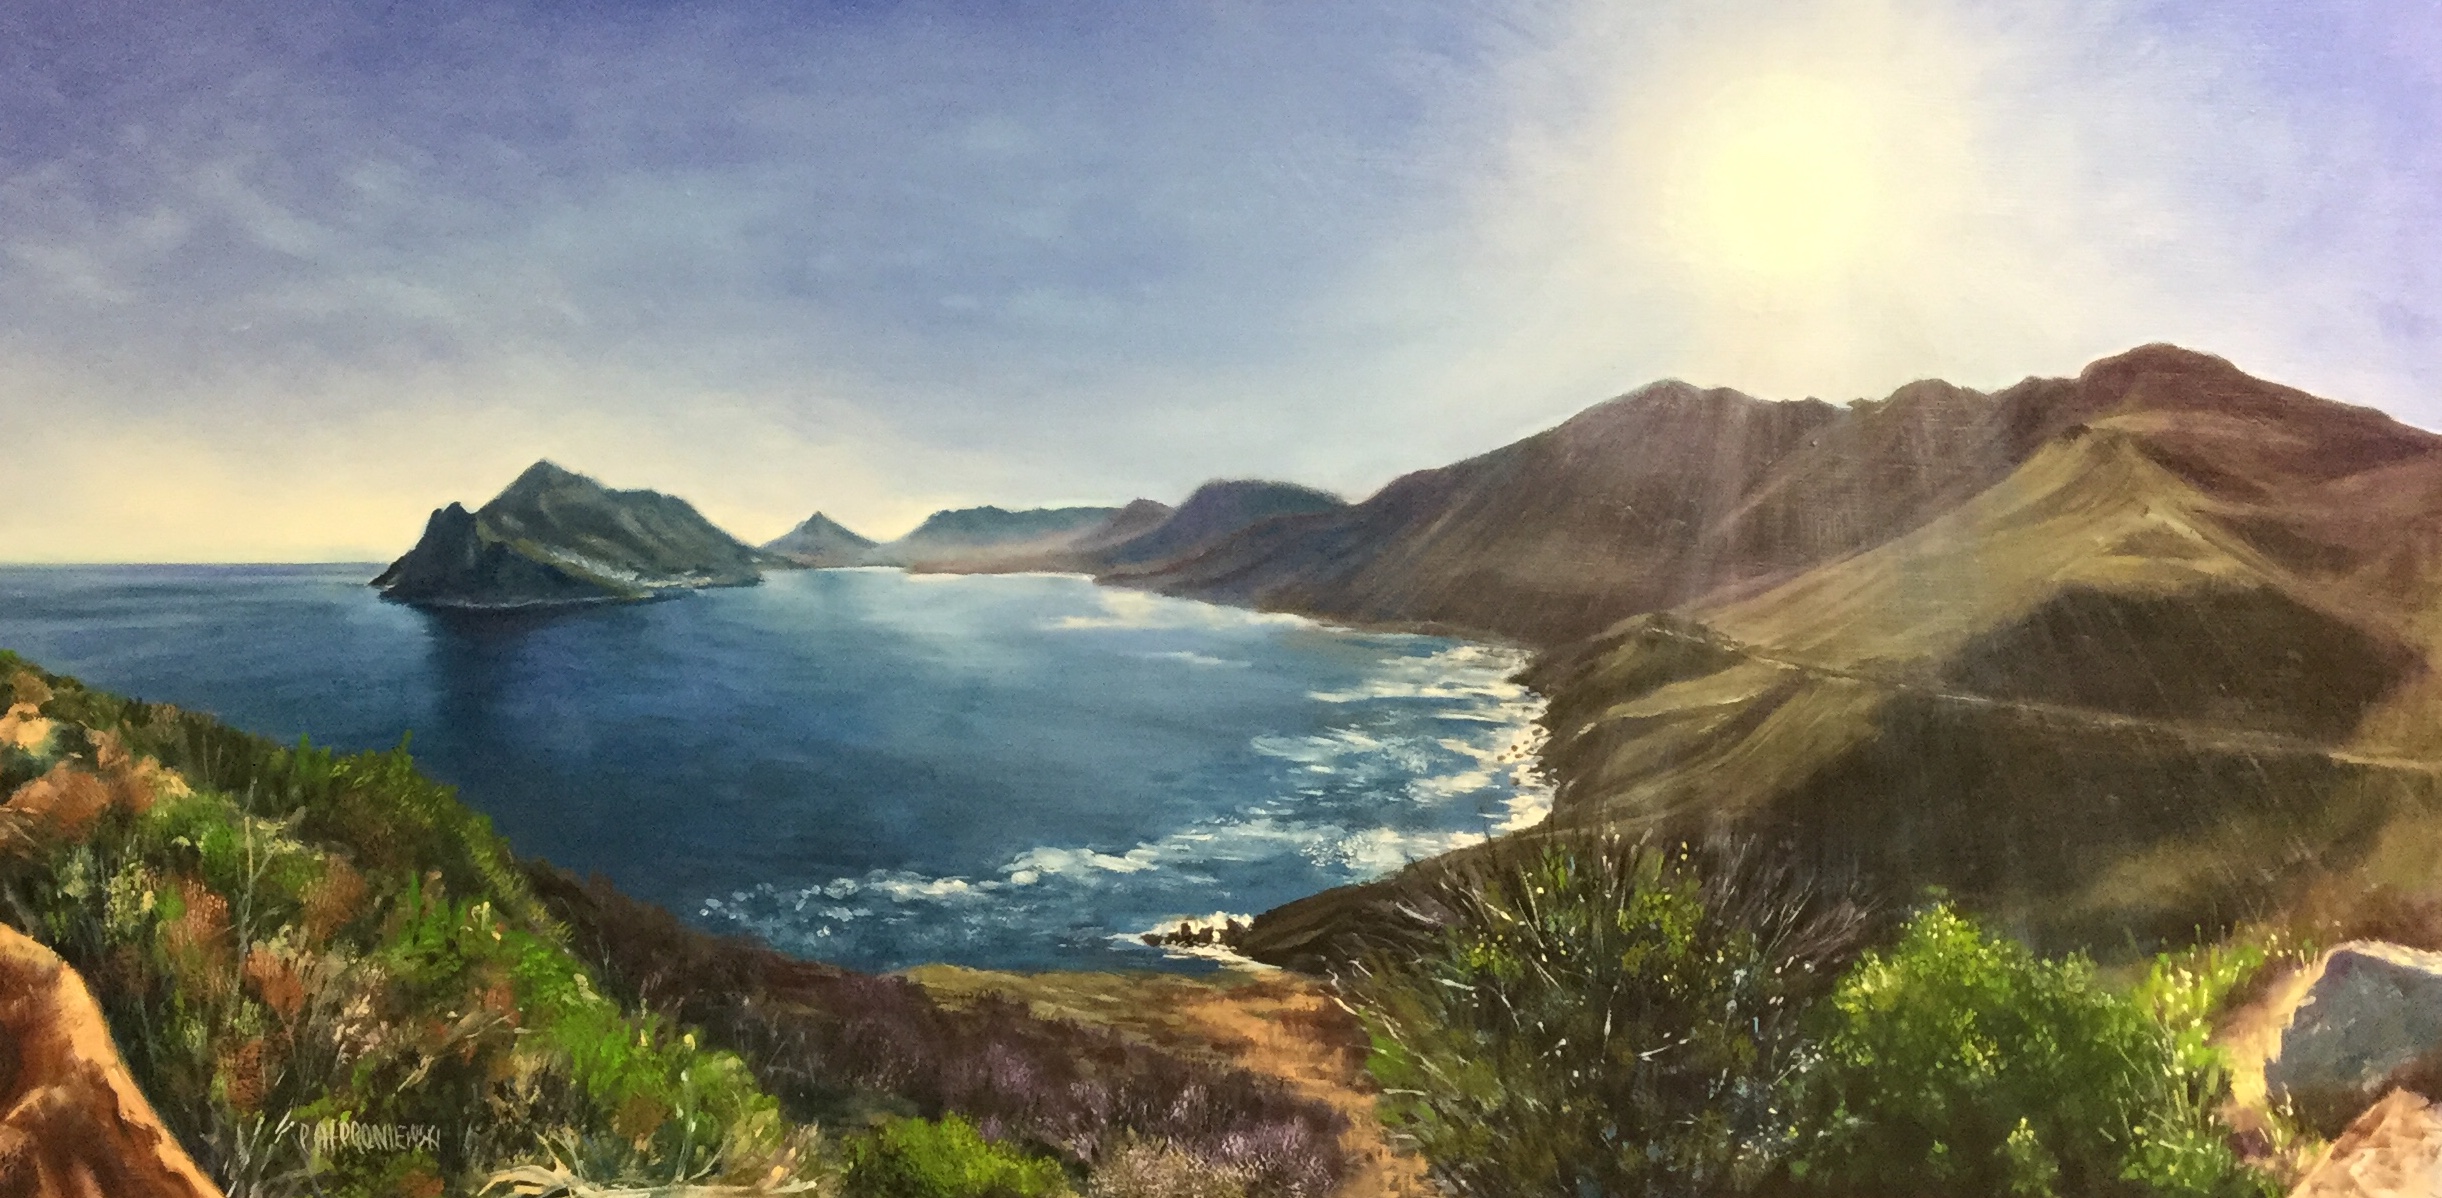 "Hout Bay, South Africa"